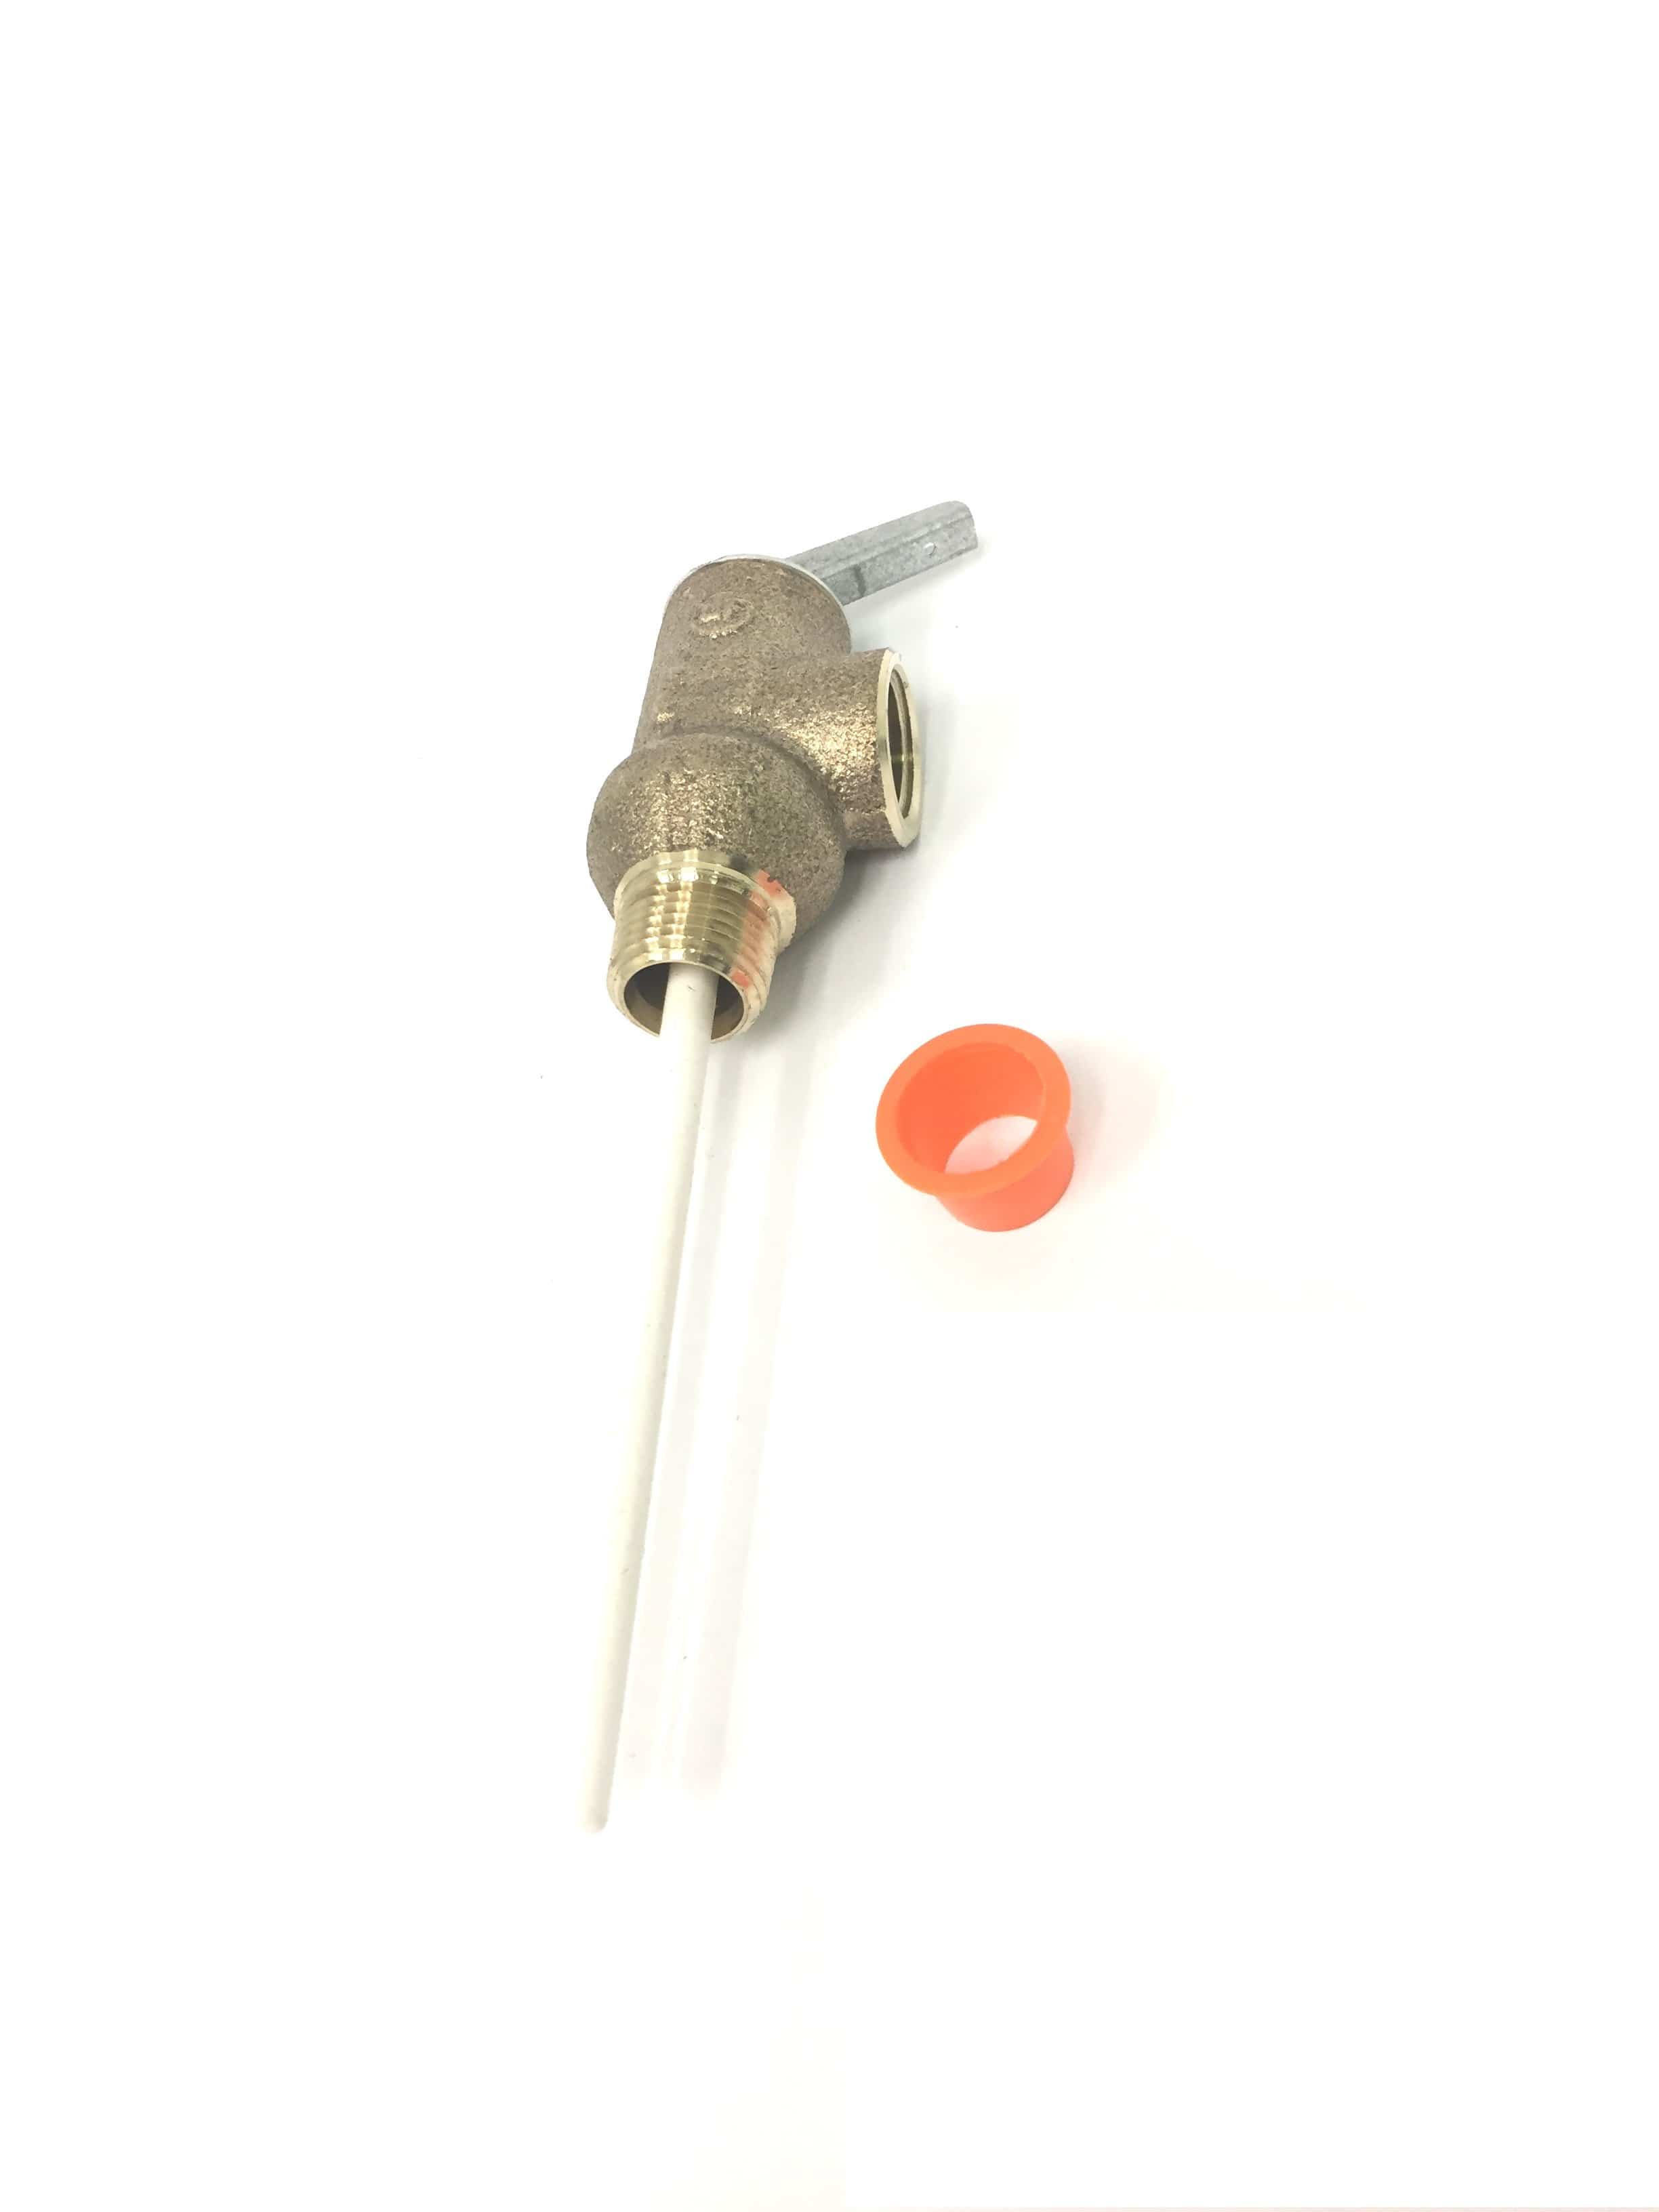 Atwood 90342 Relief Valve Pressure & Temp 1/2" 75 PSI Water Heater Part